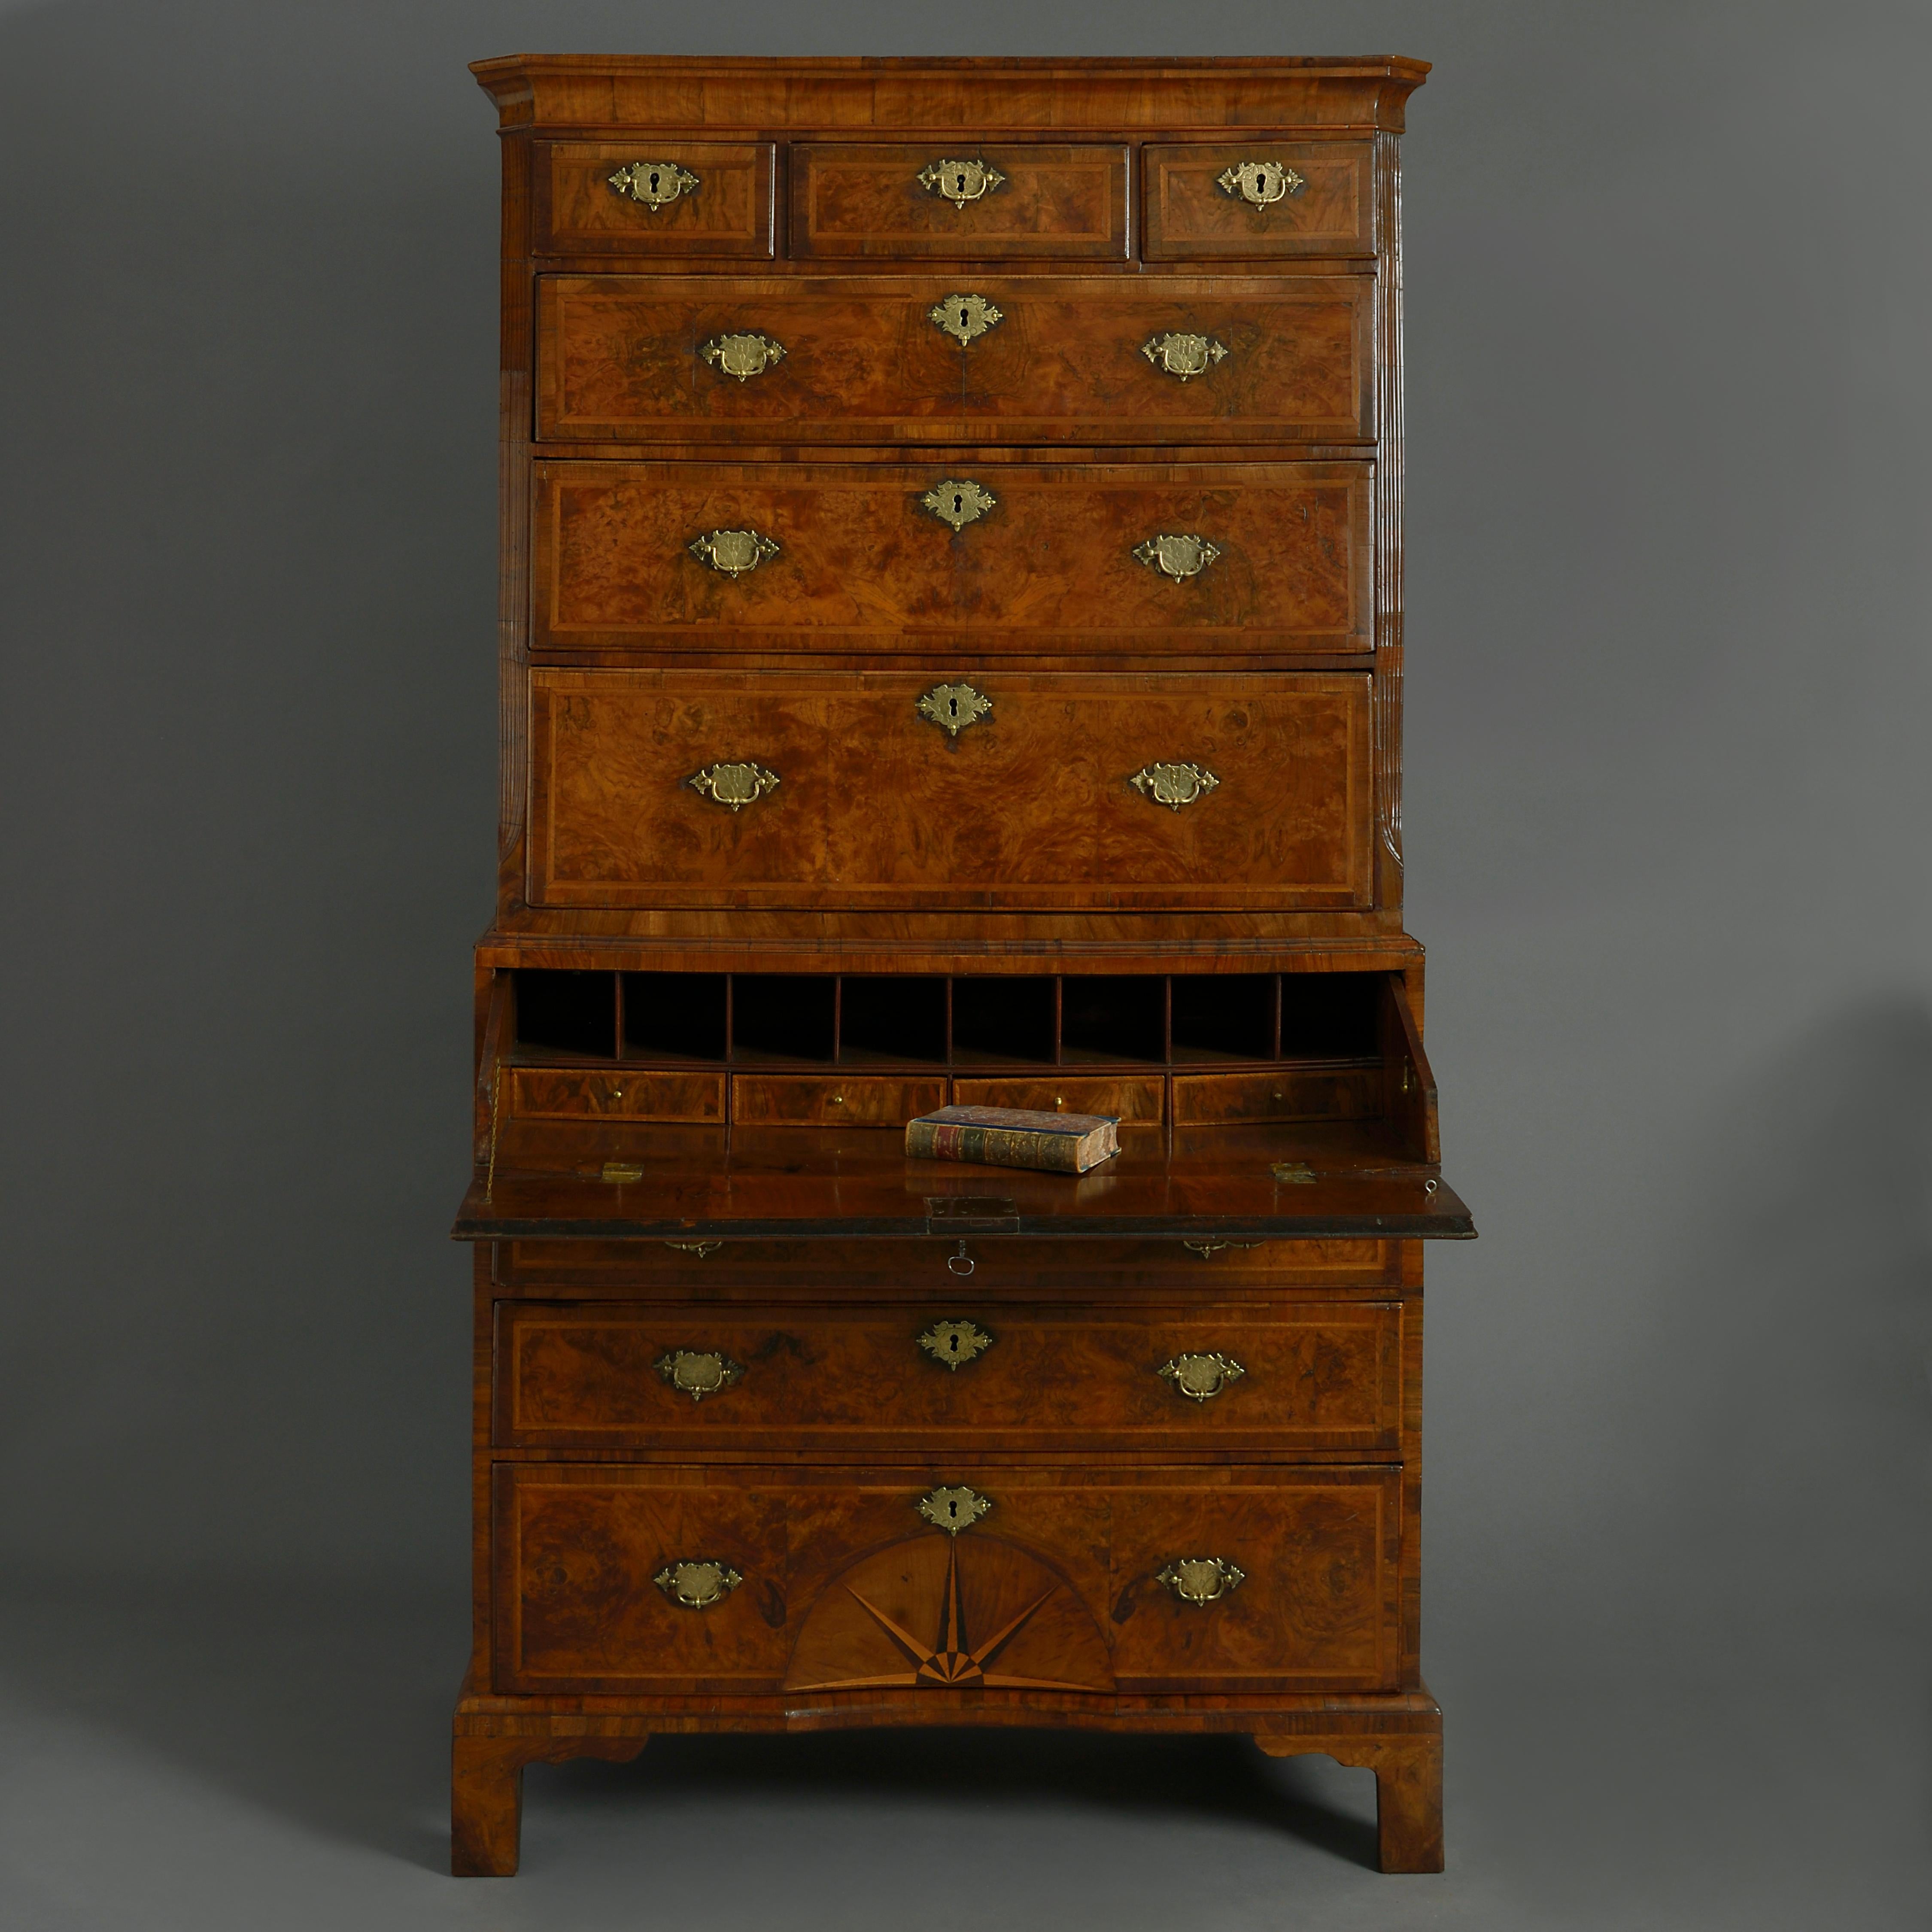 A fine early 18th century George I Period burr walnut secretaire tallboy, the shaped cornice above three short and three long drawers with herringbone inlay, crossbanding and etched brass handles and lock escutcheons, between fluted canted corners,